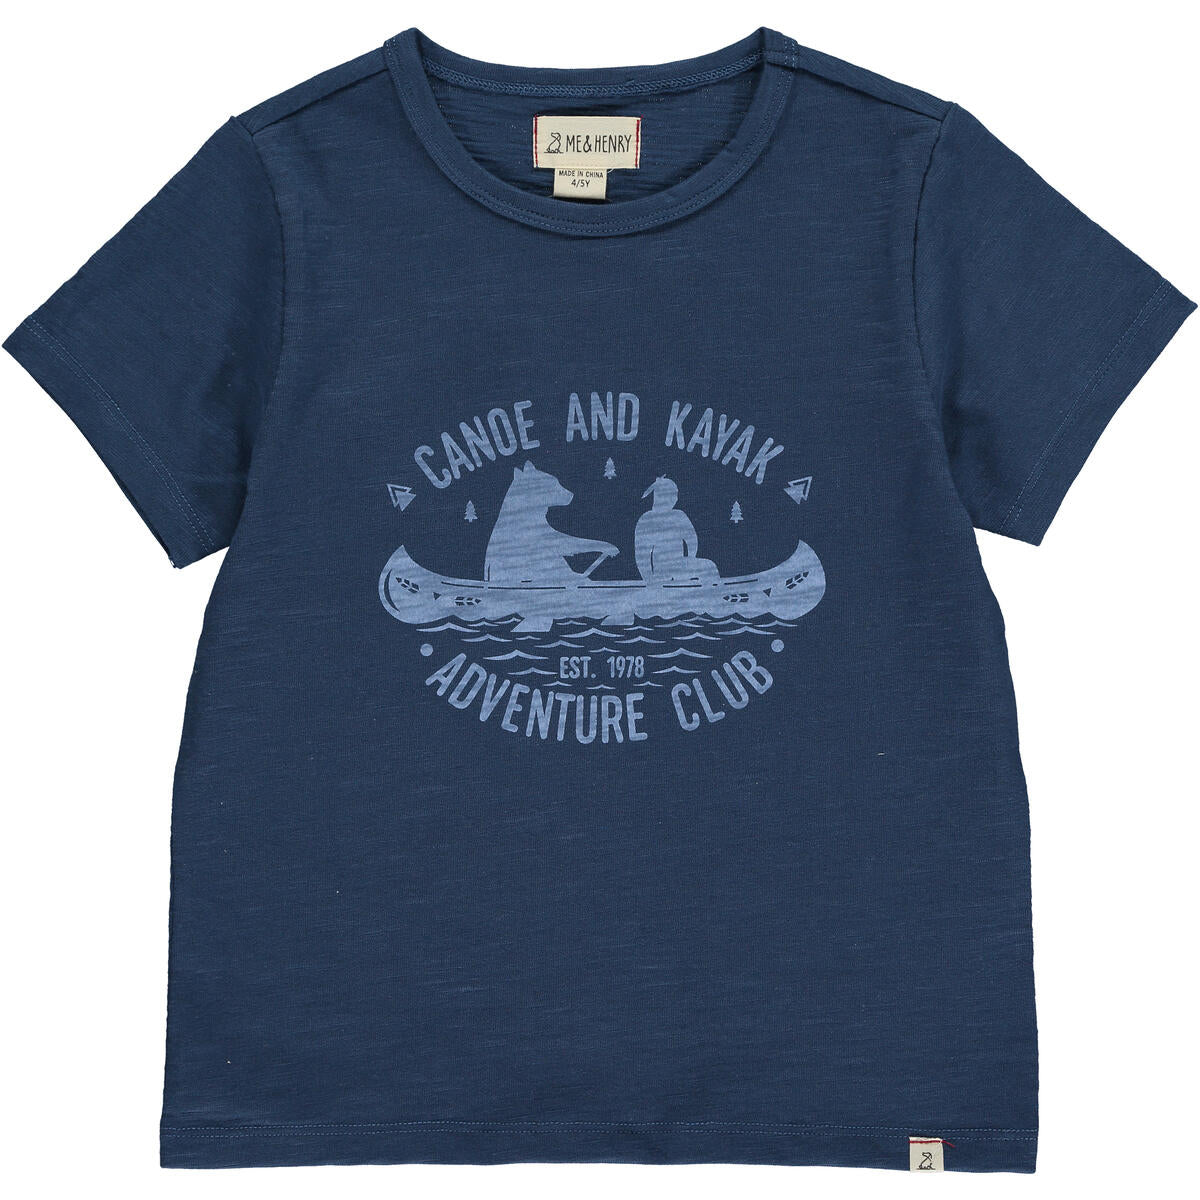 me and Henry, navy, adventure, t shirt, short sleeve, blue, cotton, little boy, toddler, baby